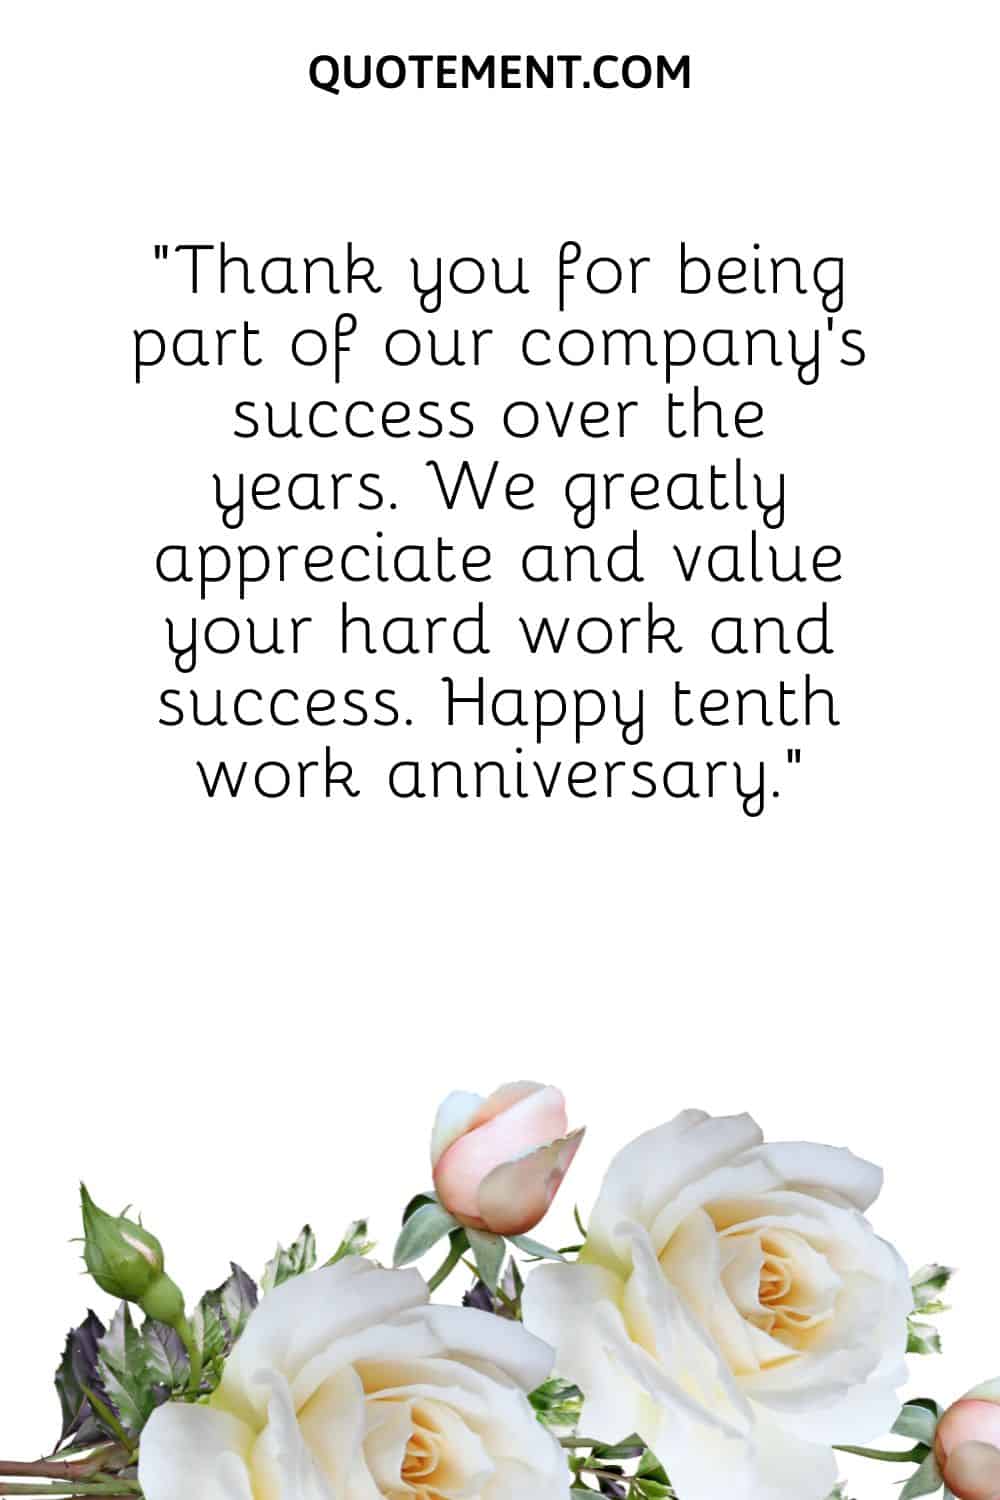 “Thank you for being part of our company’s success over the years. We greatly appreciate and value your hard work and success. Happy tenth work anniversary.”